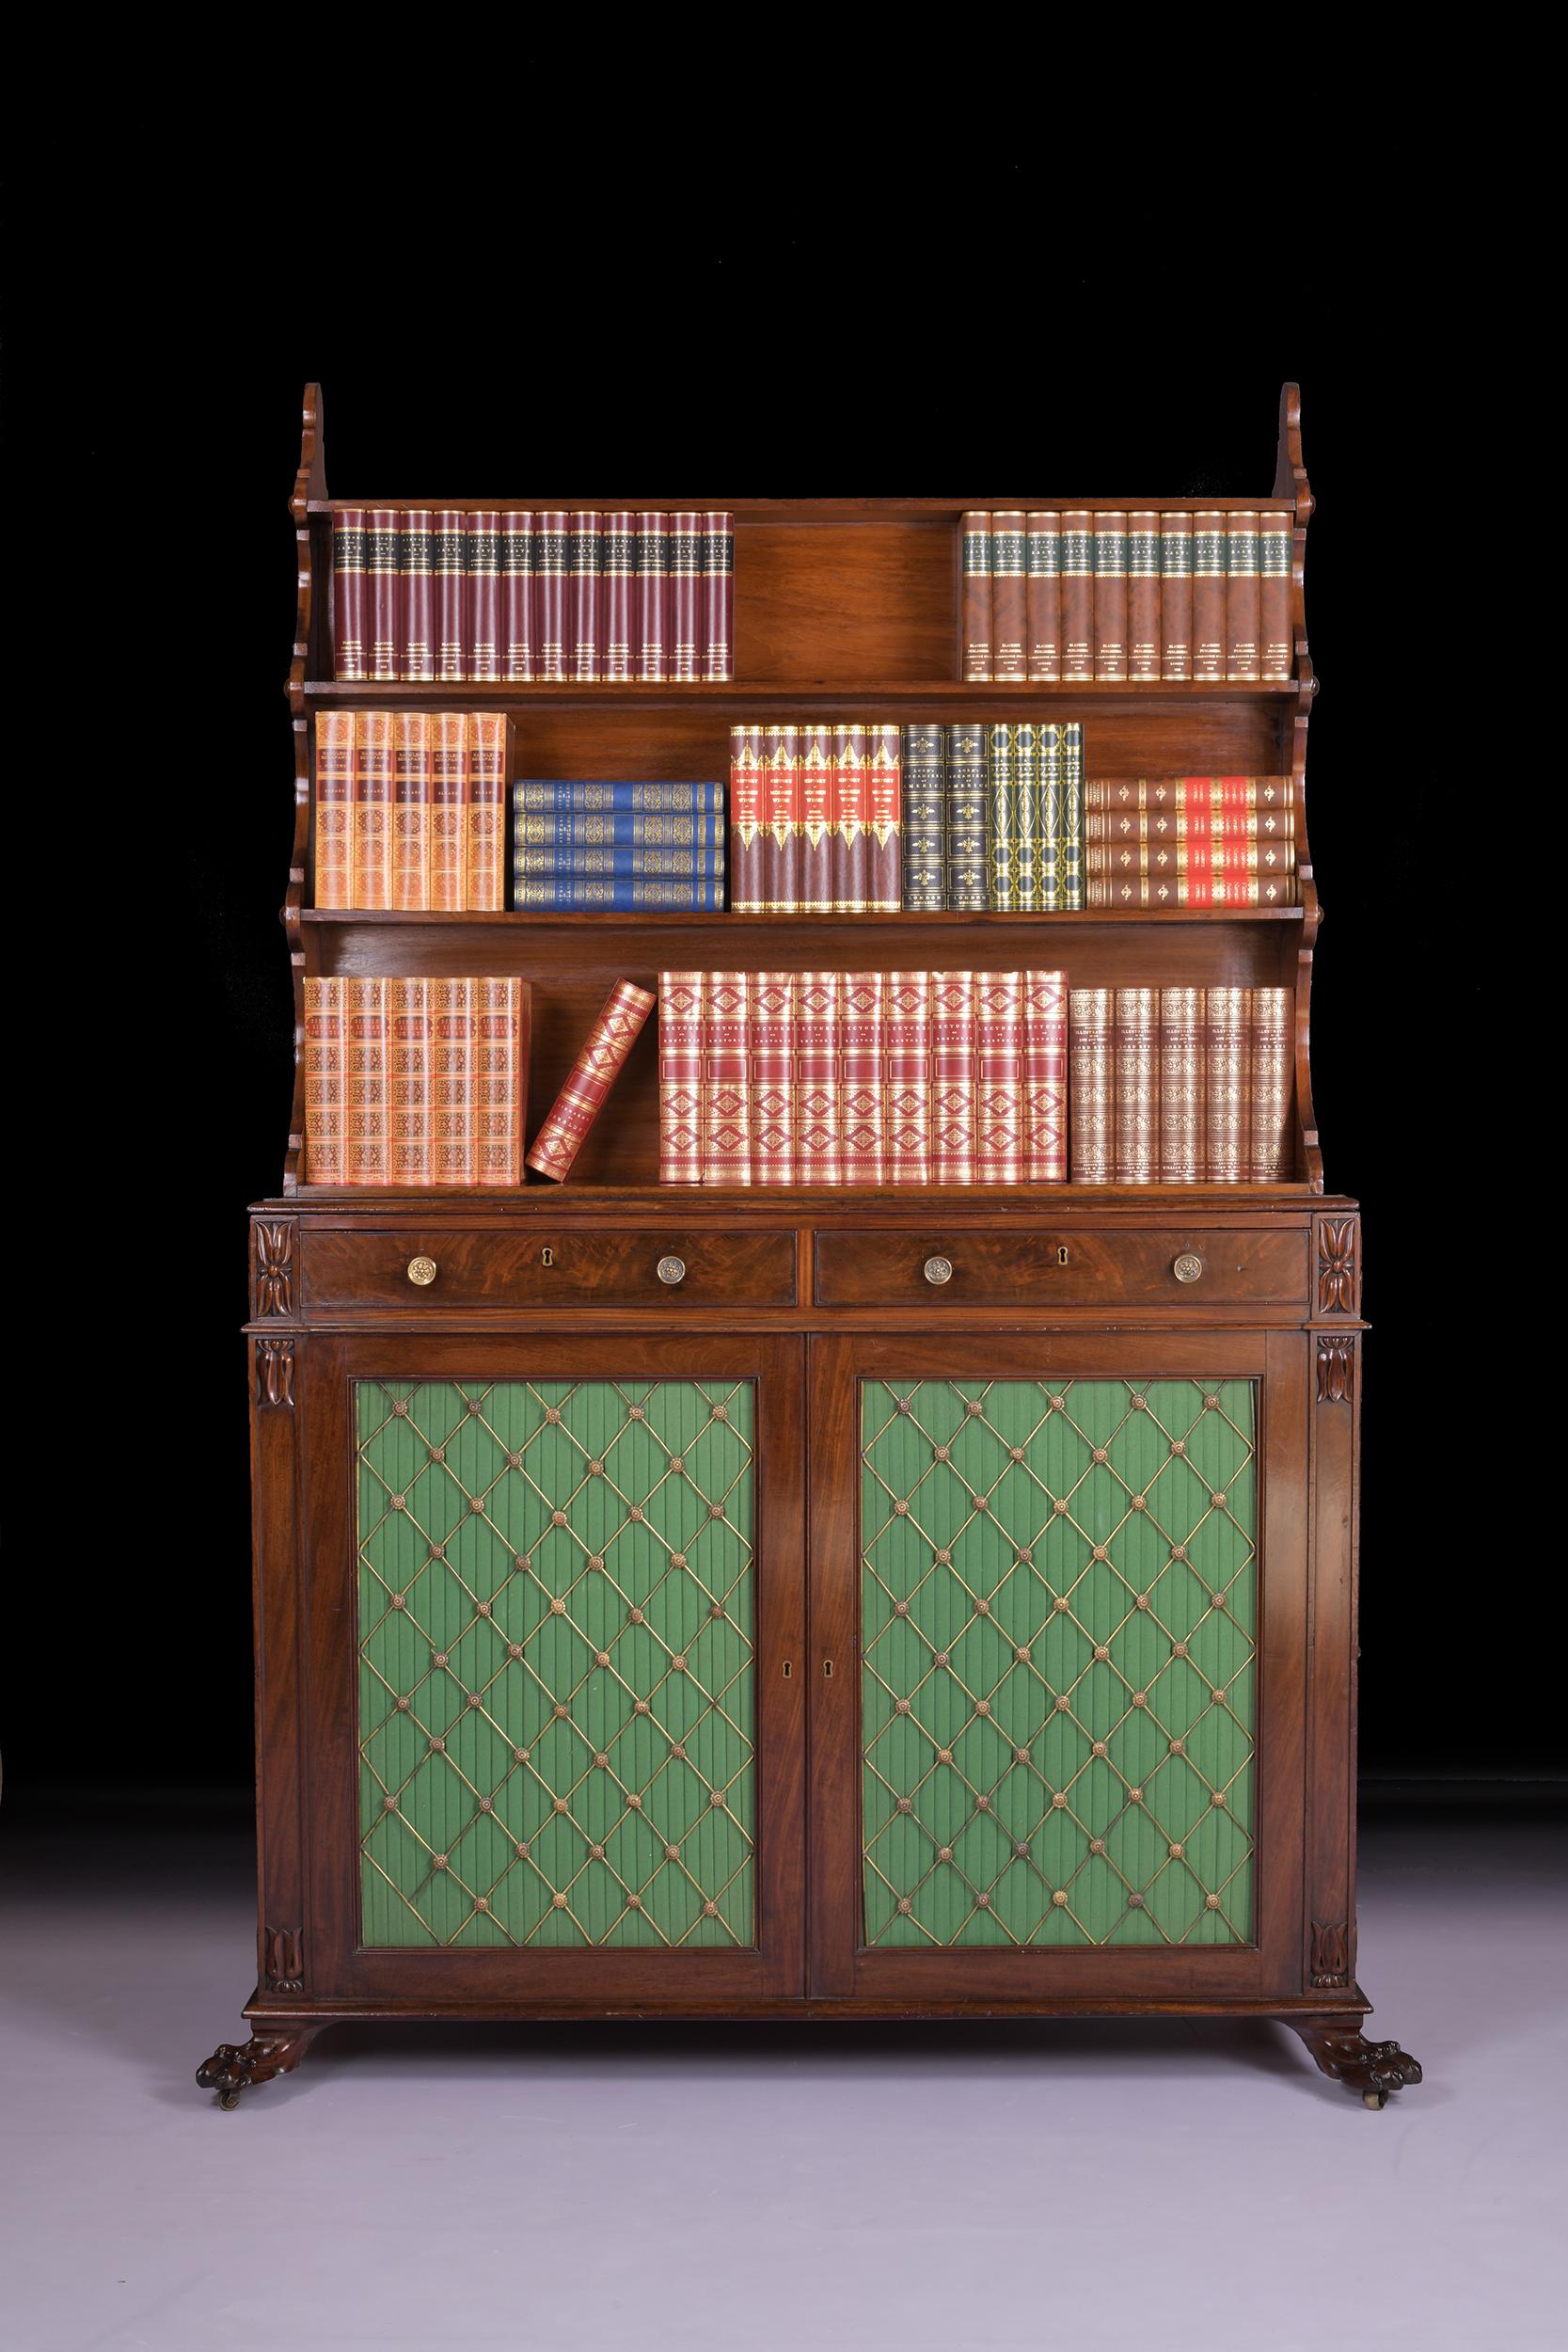 A very fine Irish late Regency early William IV mahogany freestanding double waterfall bookcase, stamped 